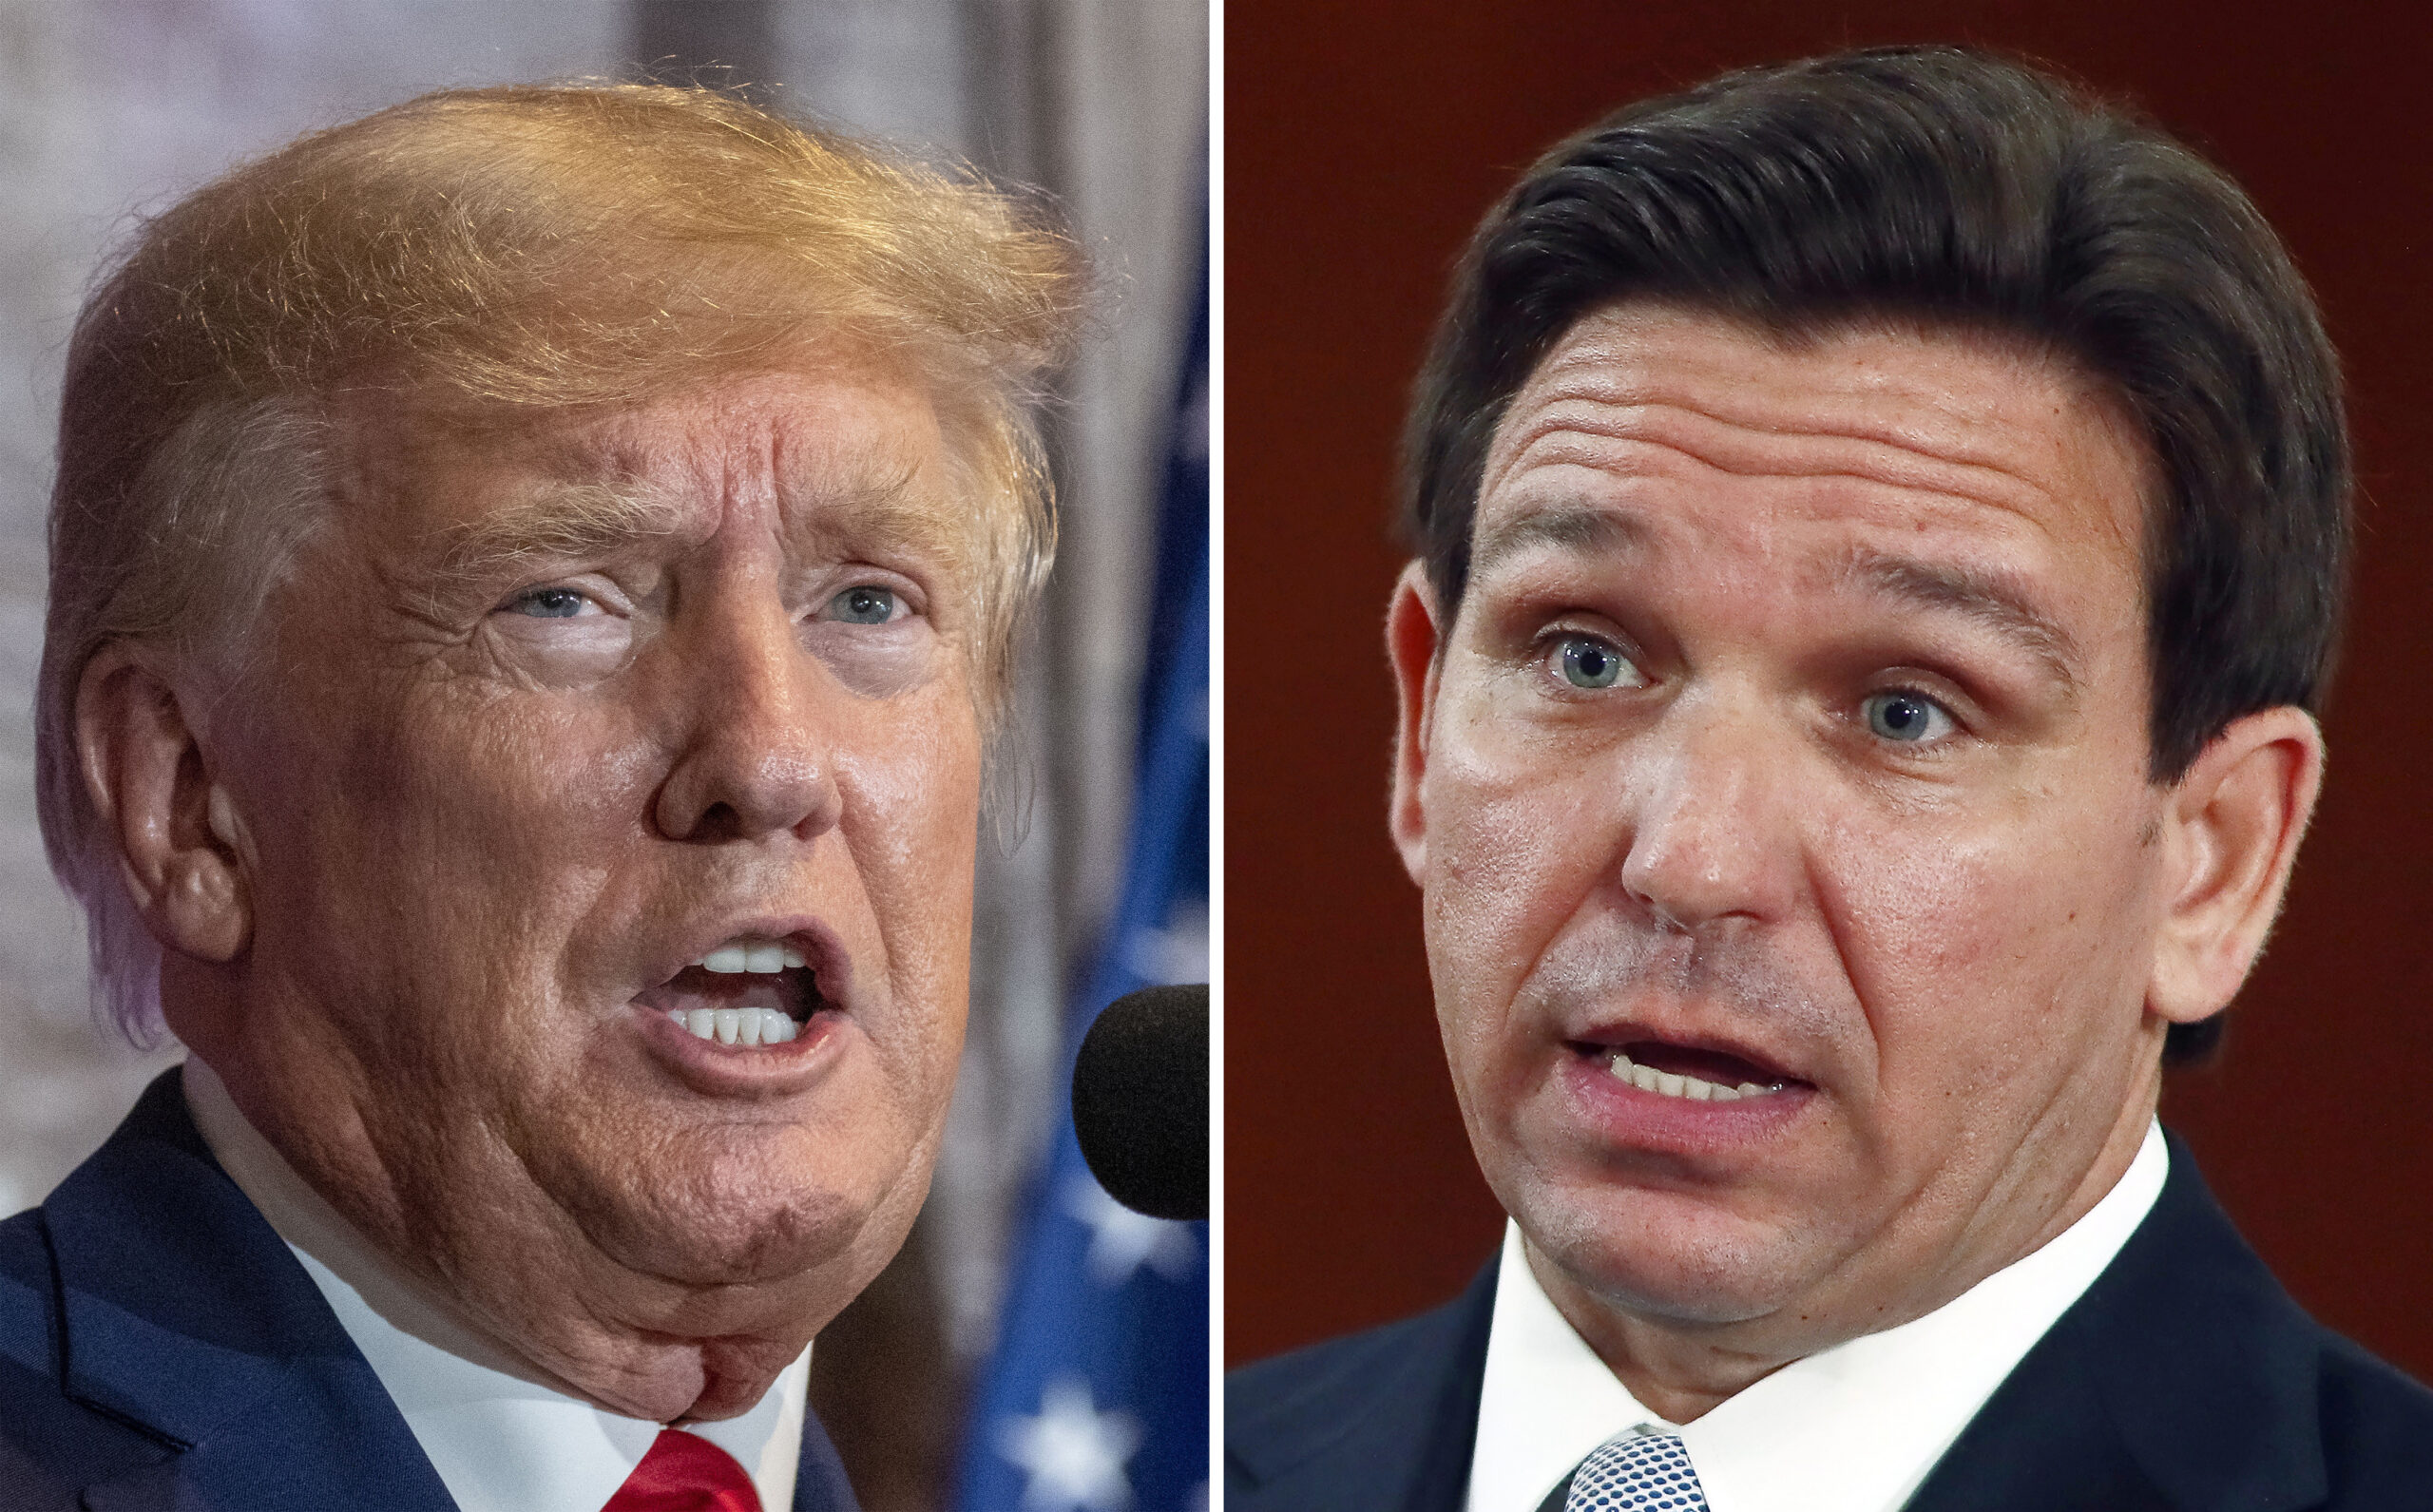 ‘Thirsty AF’: Trump Campaign Likens DeSantis to ‘OnlyFans Wannabe Model’